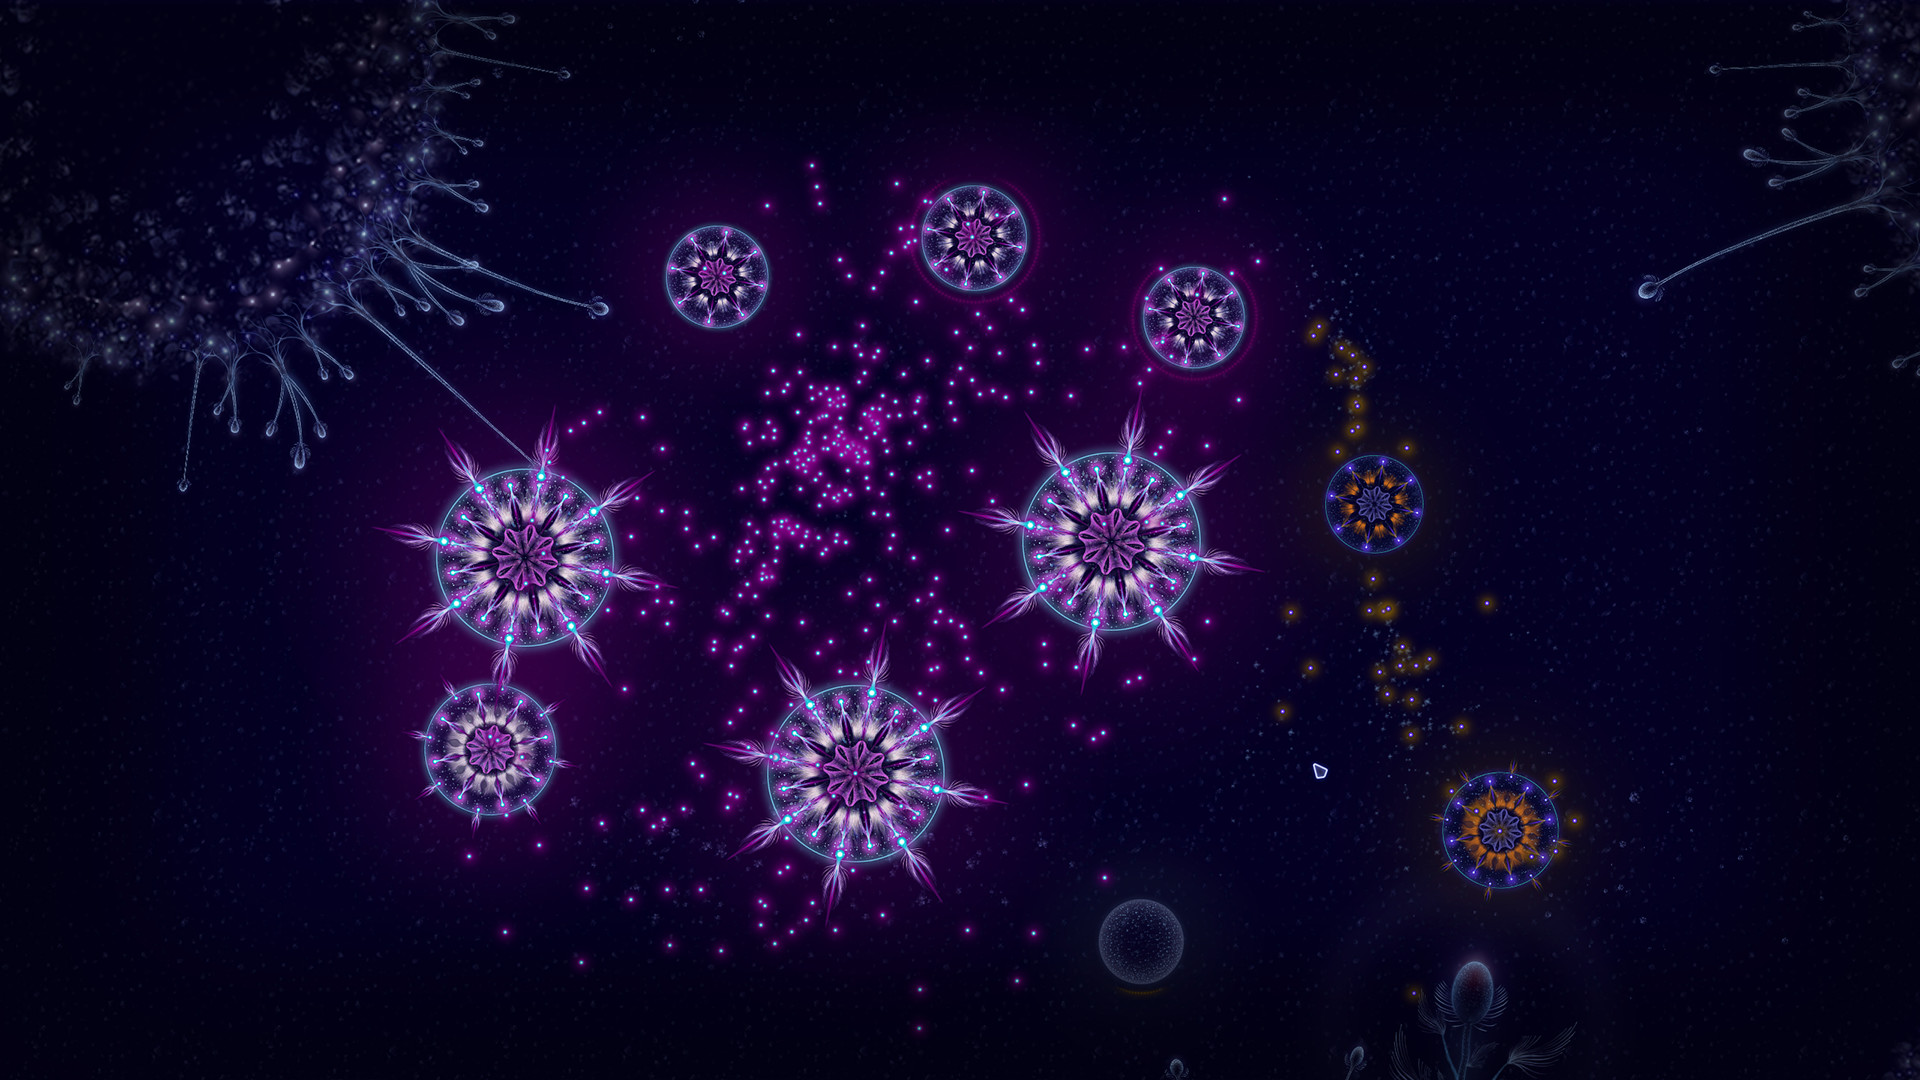 Microcosmum: survival of cells - Colors for organisms screenshot